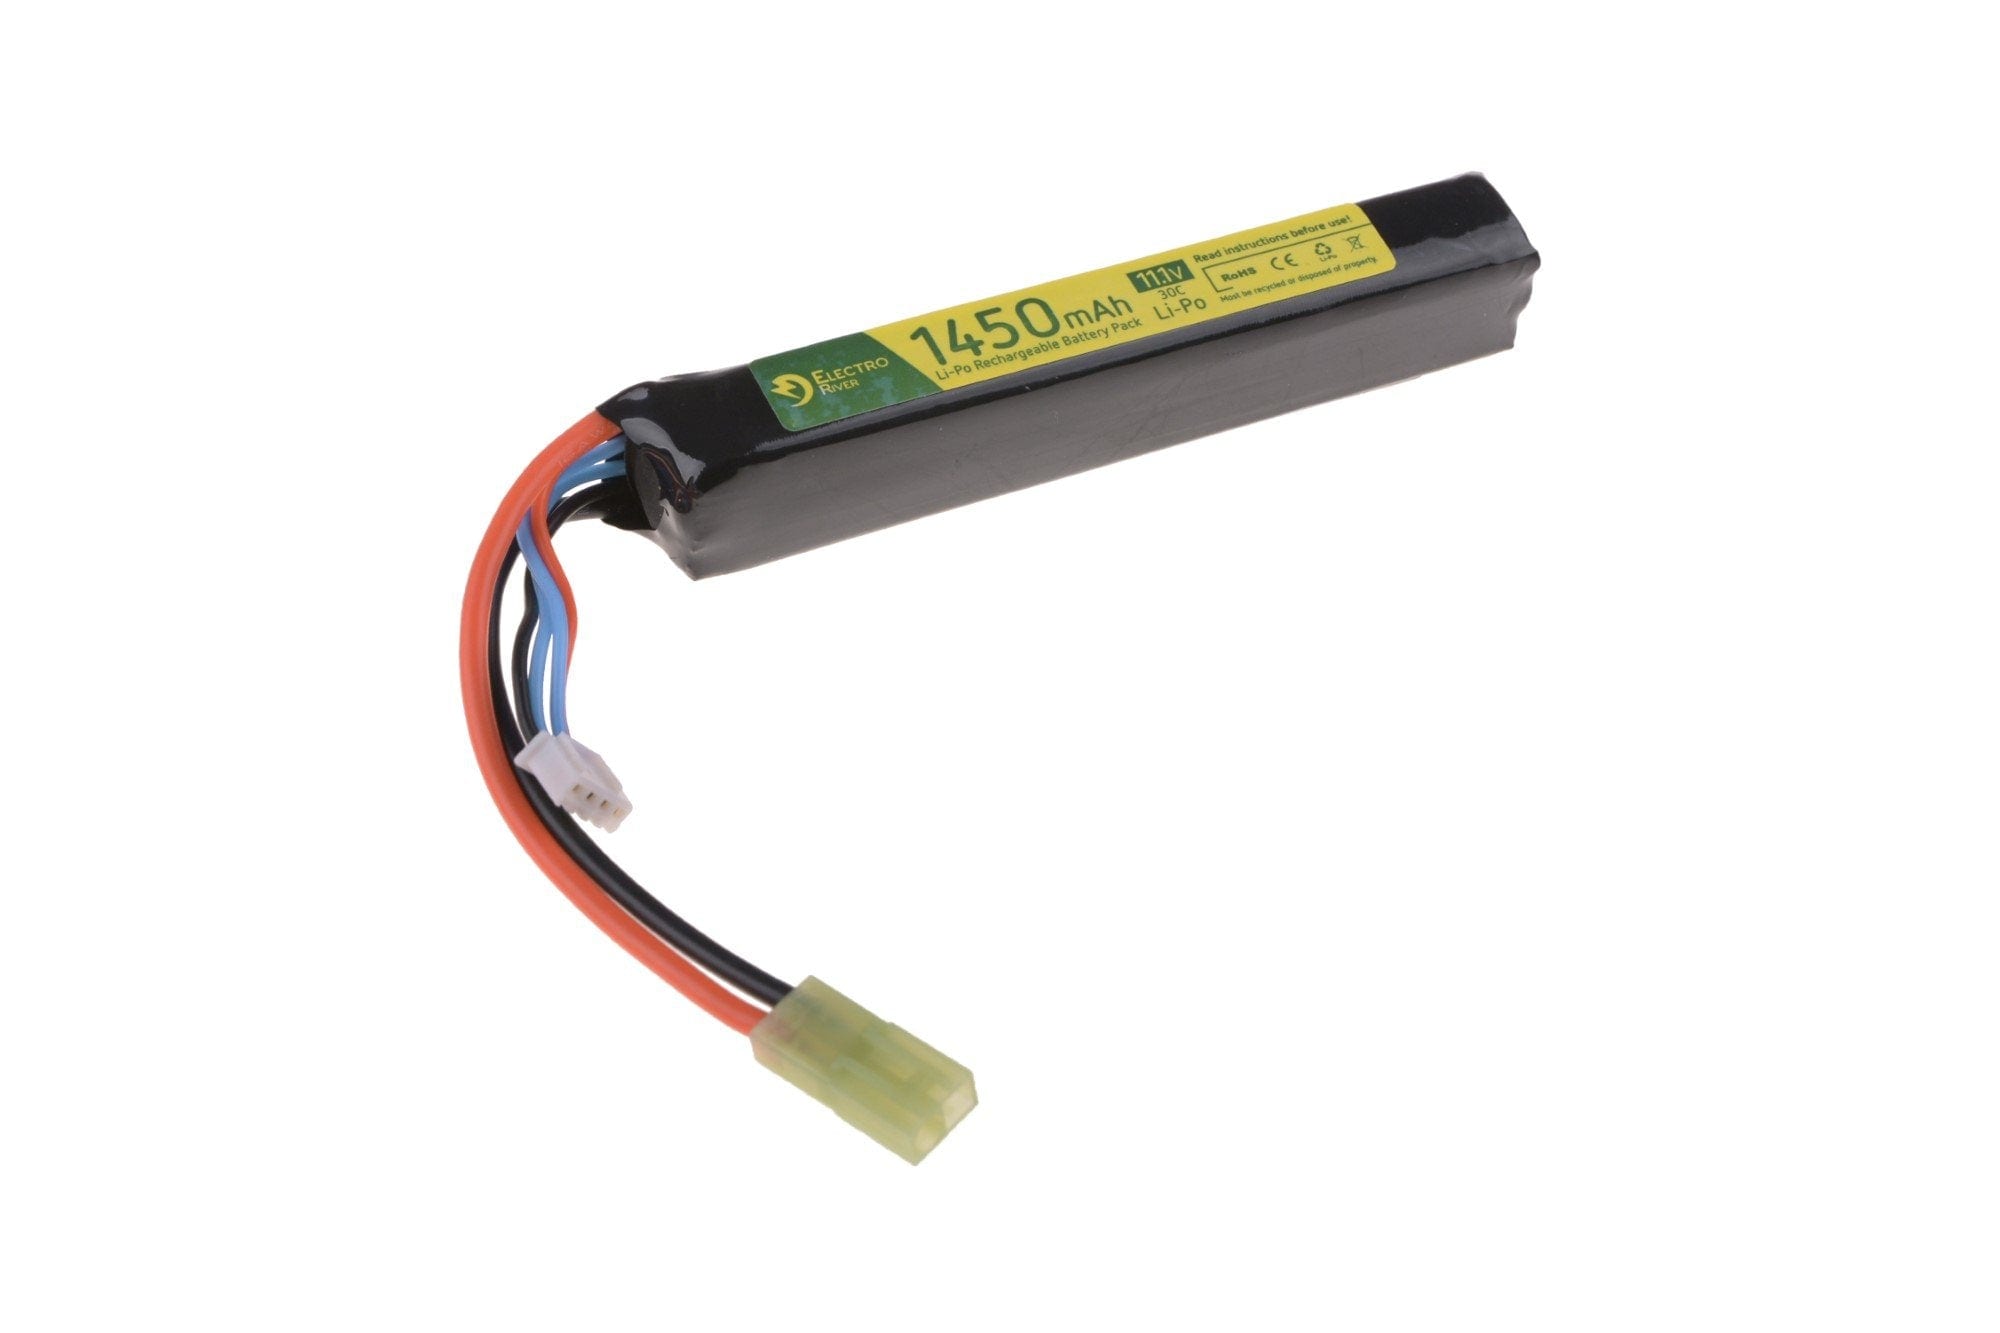 LiPo 11.1V 1450mAh 30C Battery by Electro River on Airsoft Mania Europe